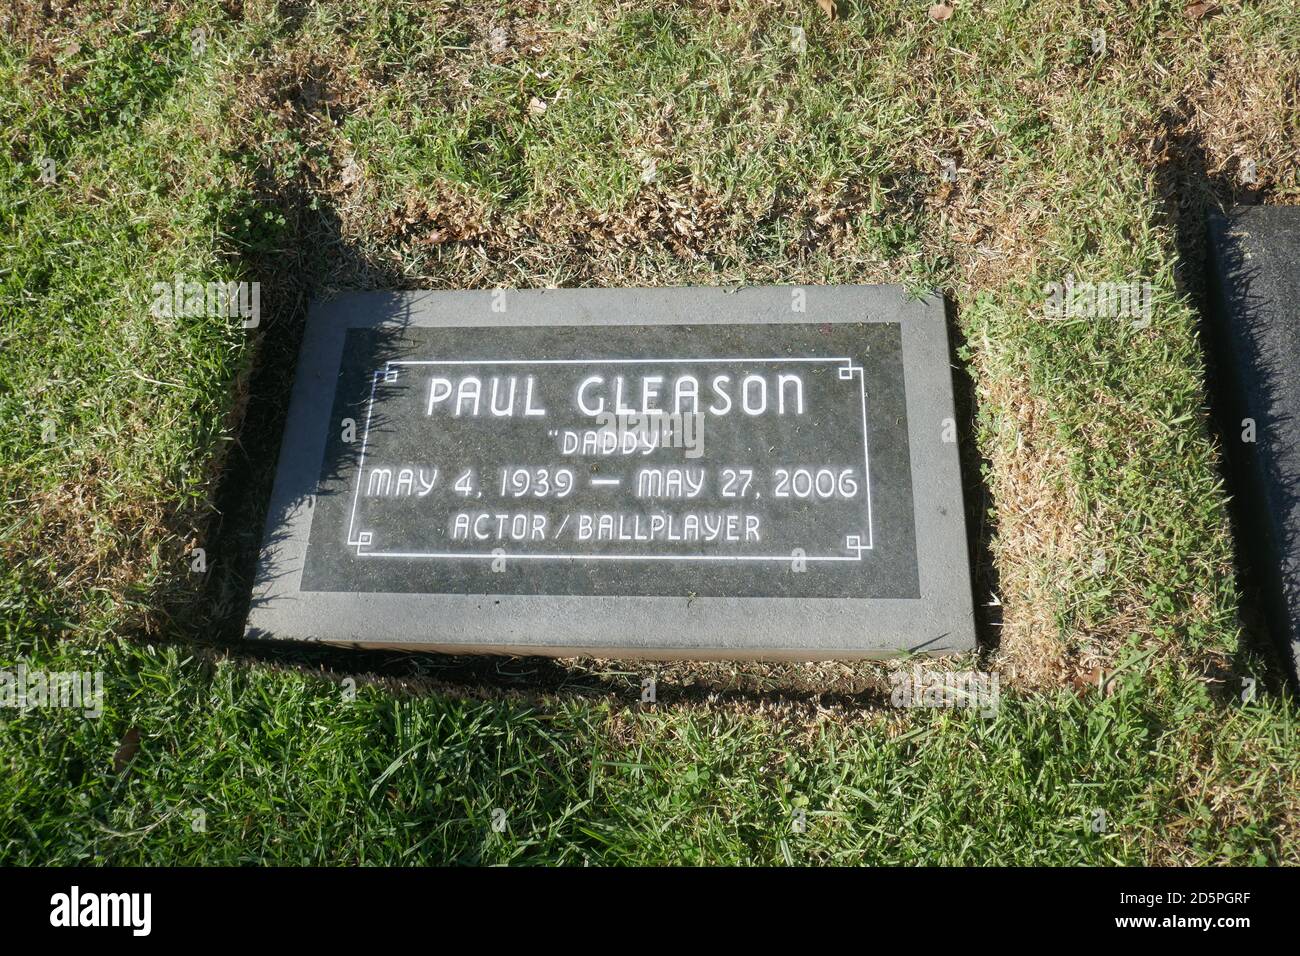 Los Angeles, California, USA 13th October 2020 A general view of atmosphere of actor Paul Gleason's Grave at Pierce Brothers Westwood Village Memorial Park on October 13, 2020 in Los Angeles, California, USA. Photo by Barry King/Alamy Stock Photo Stock Photo